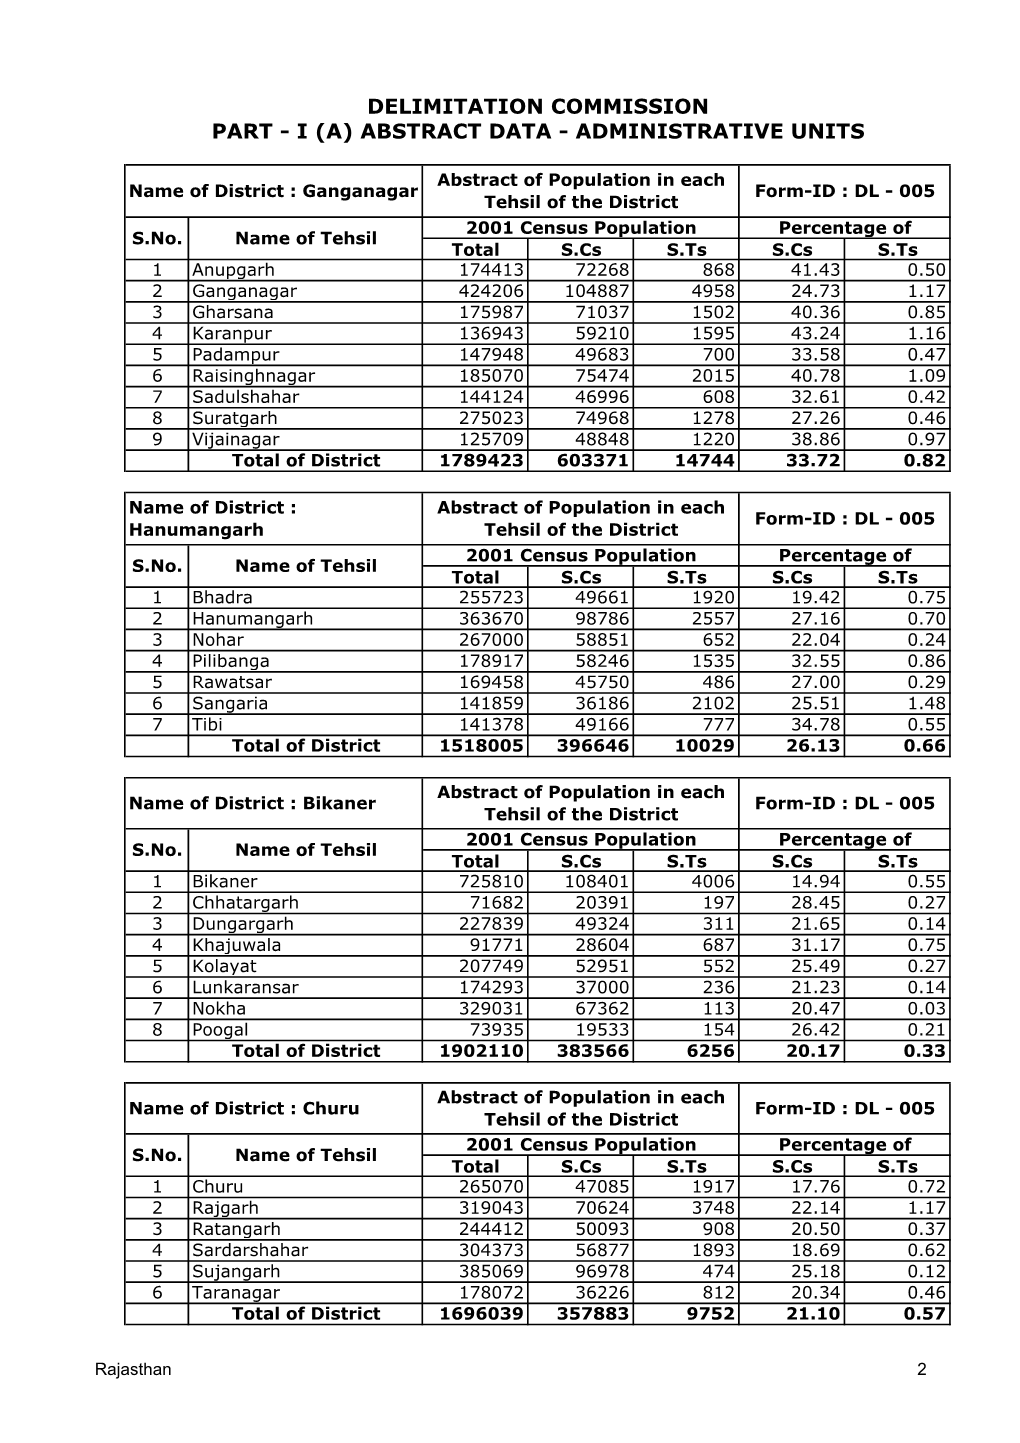 Delimitation Commission Part - I (A) Abstract Data - Administrative Units